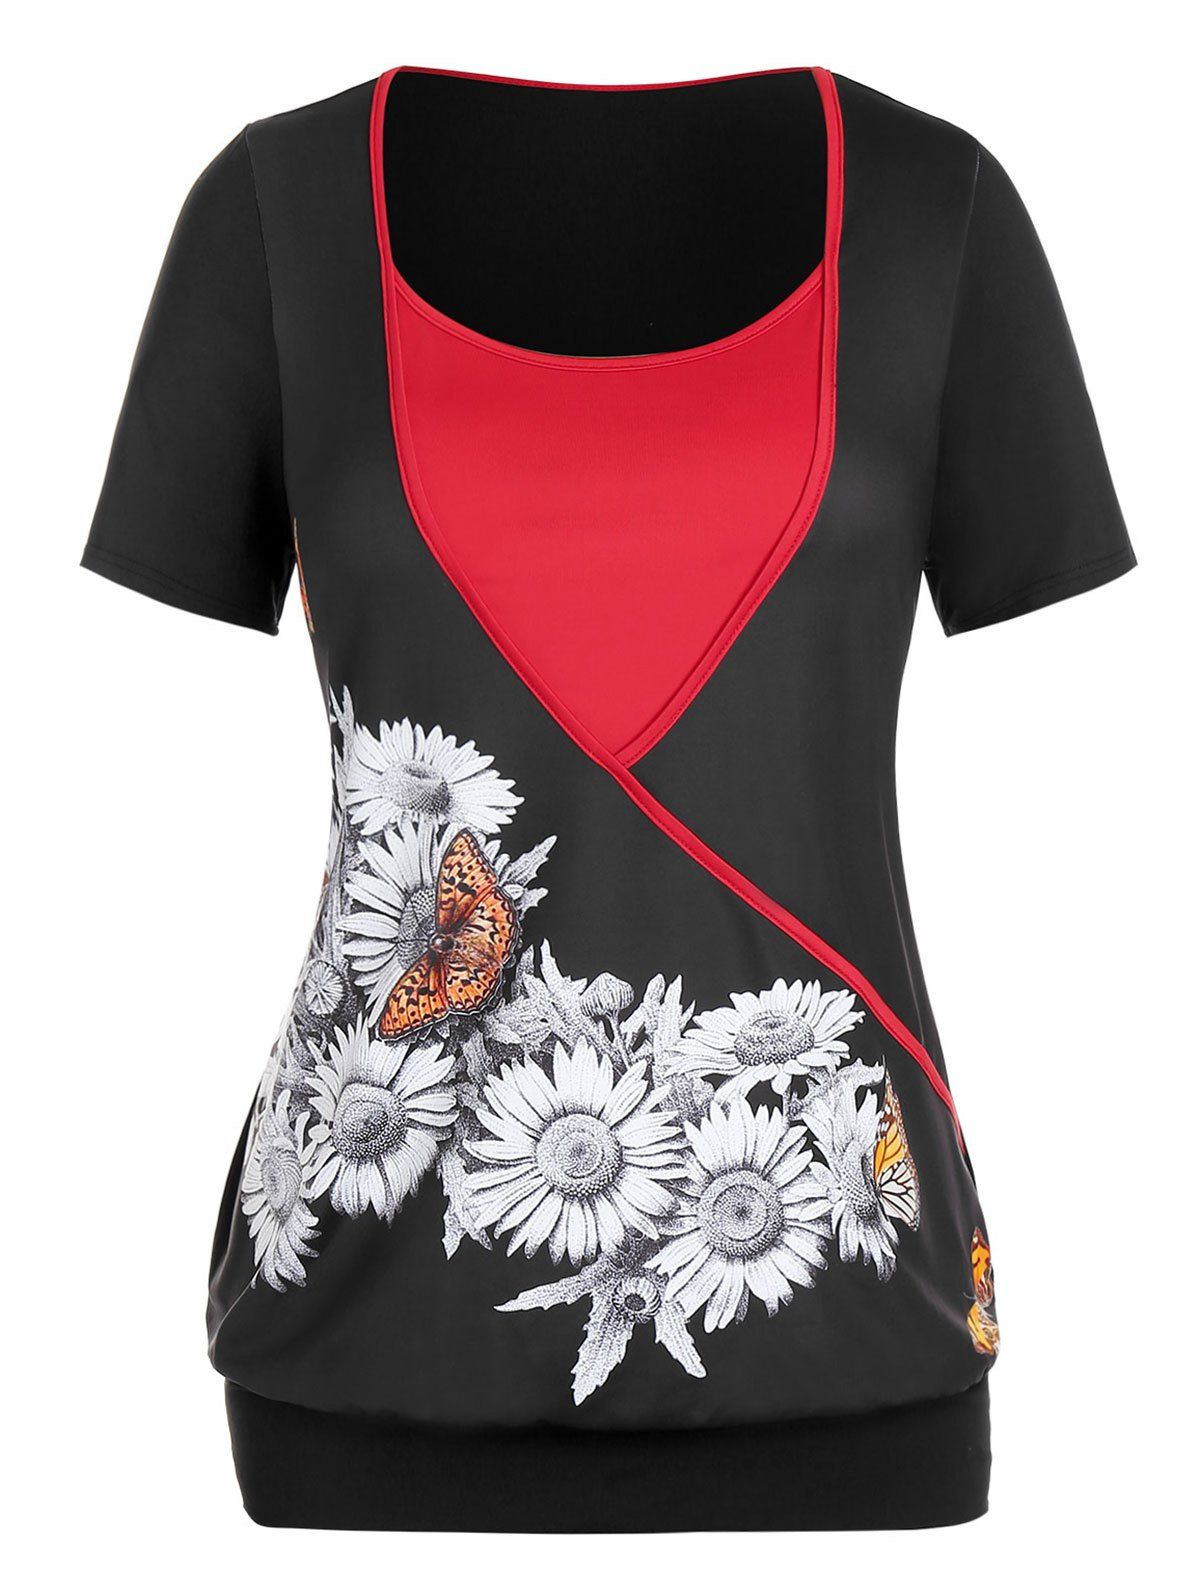 Plus Size Sunflower Butterfly Print Two Tone T Shirt - BLACK 5X